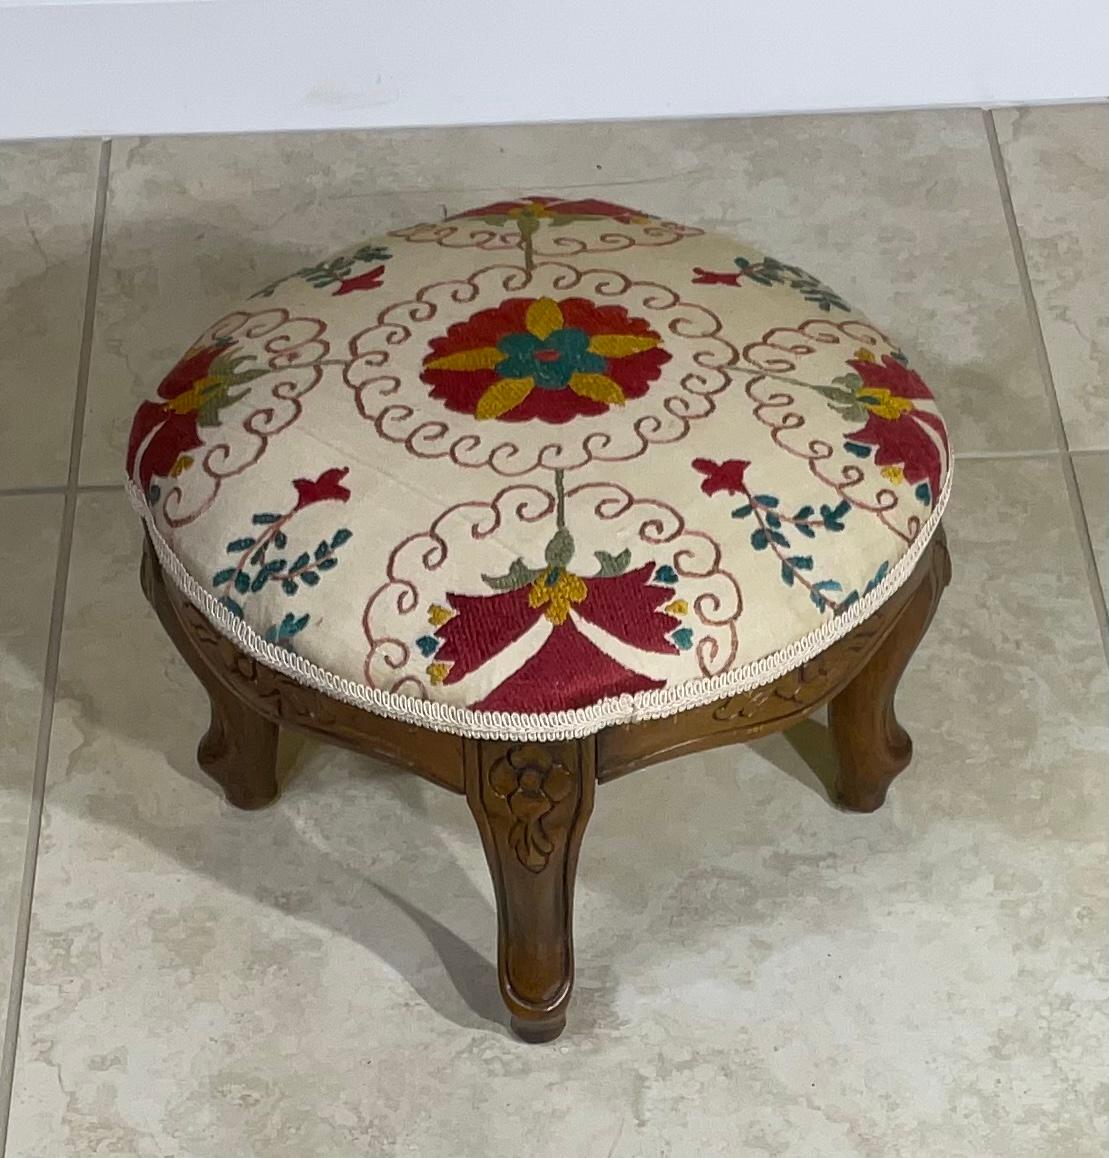 Exceptional vintage foot stool made of hand carved wood upholster with beautiful hand embroidery Suzani textile.
Great decorative item for any room.